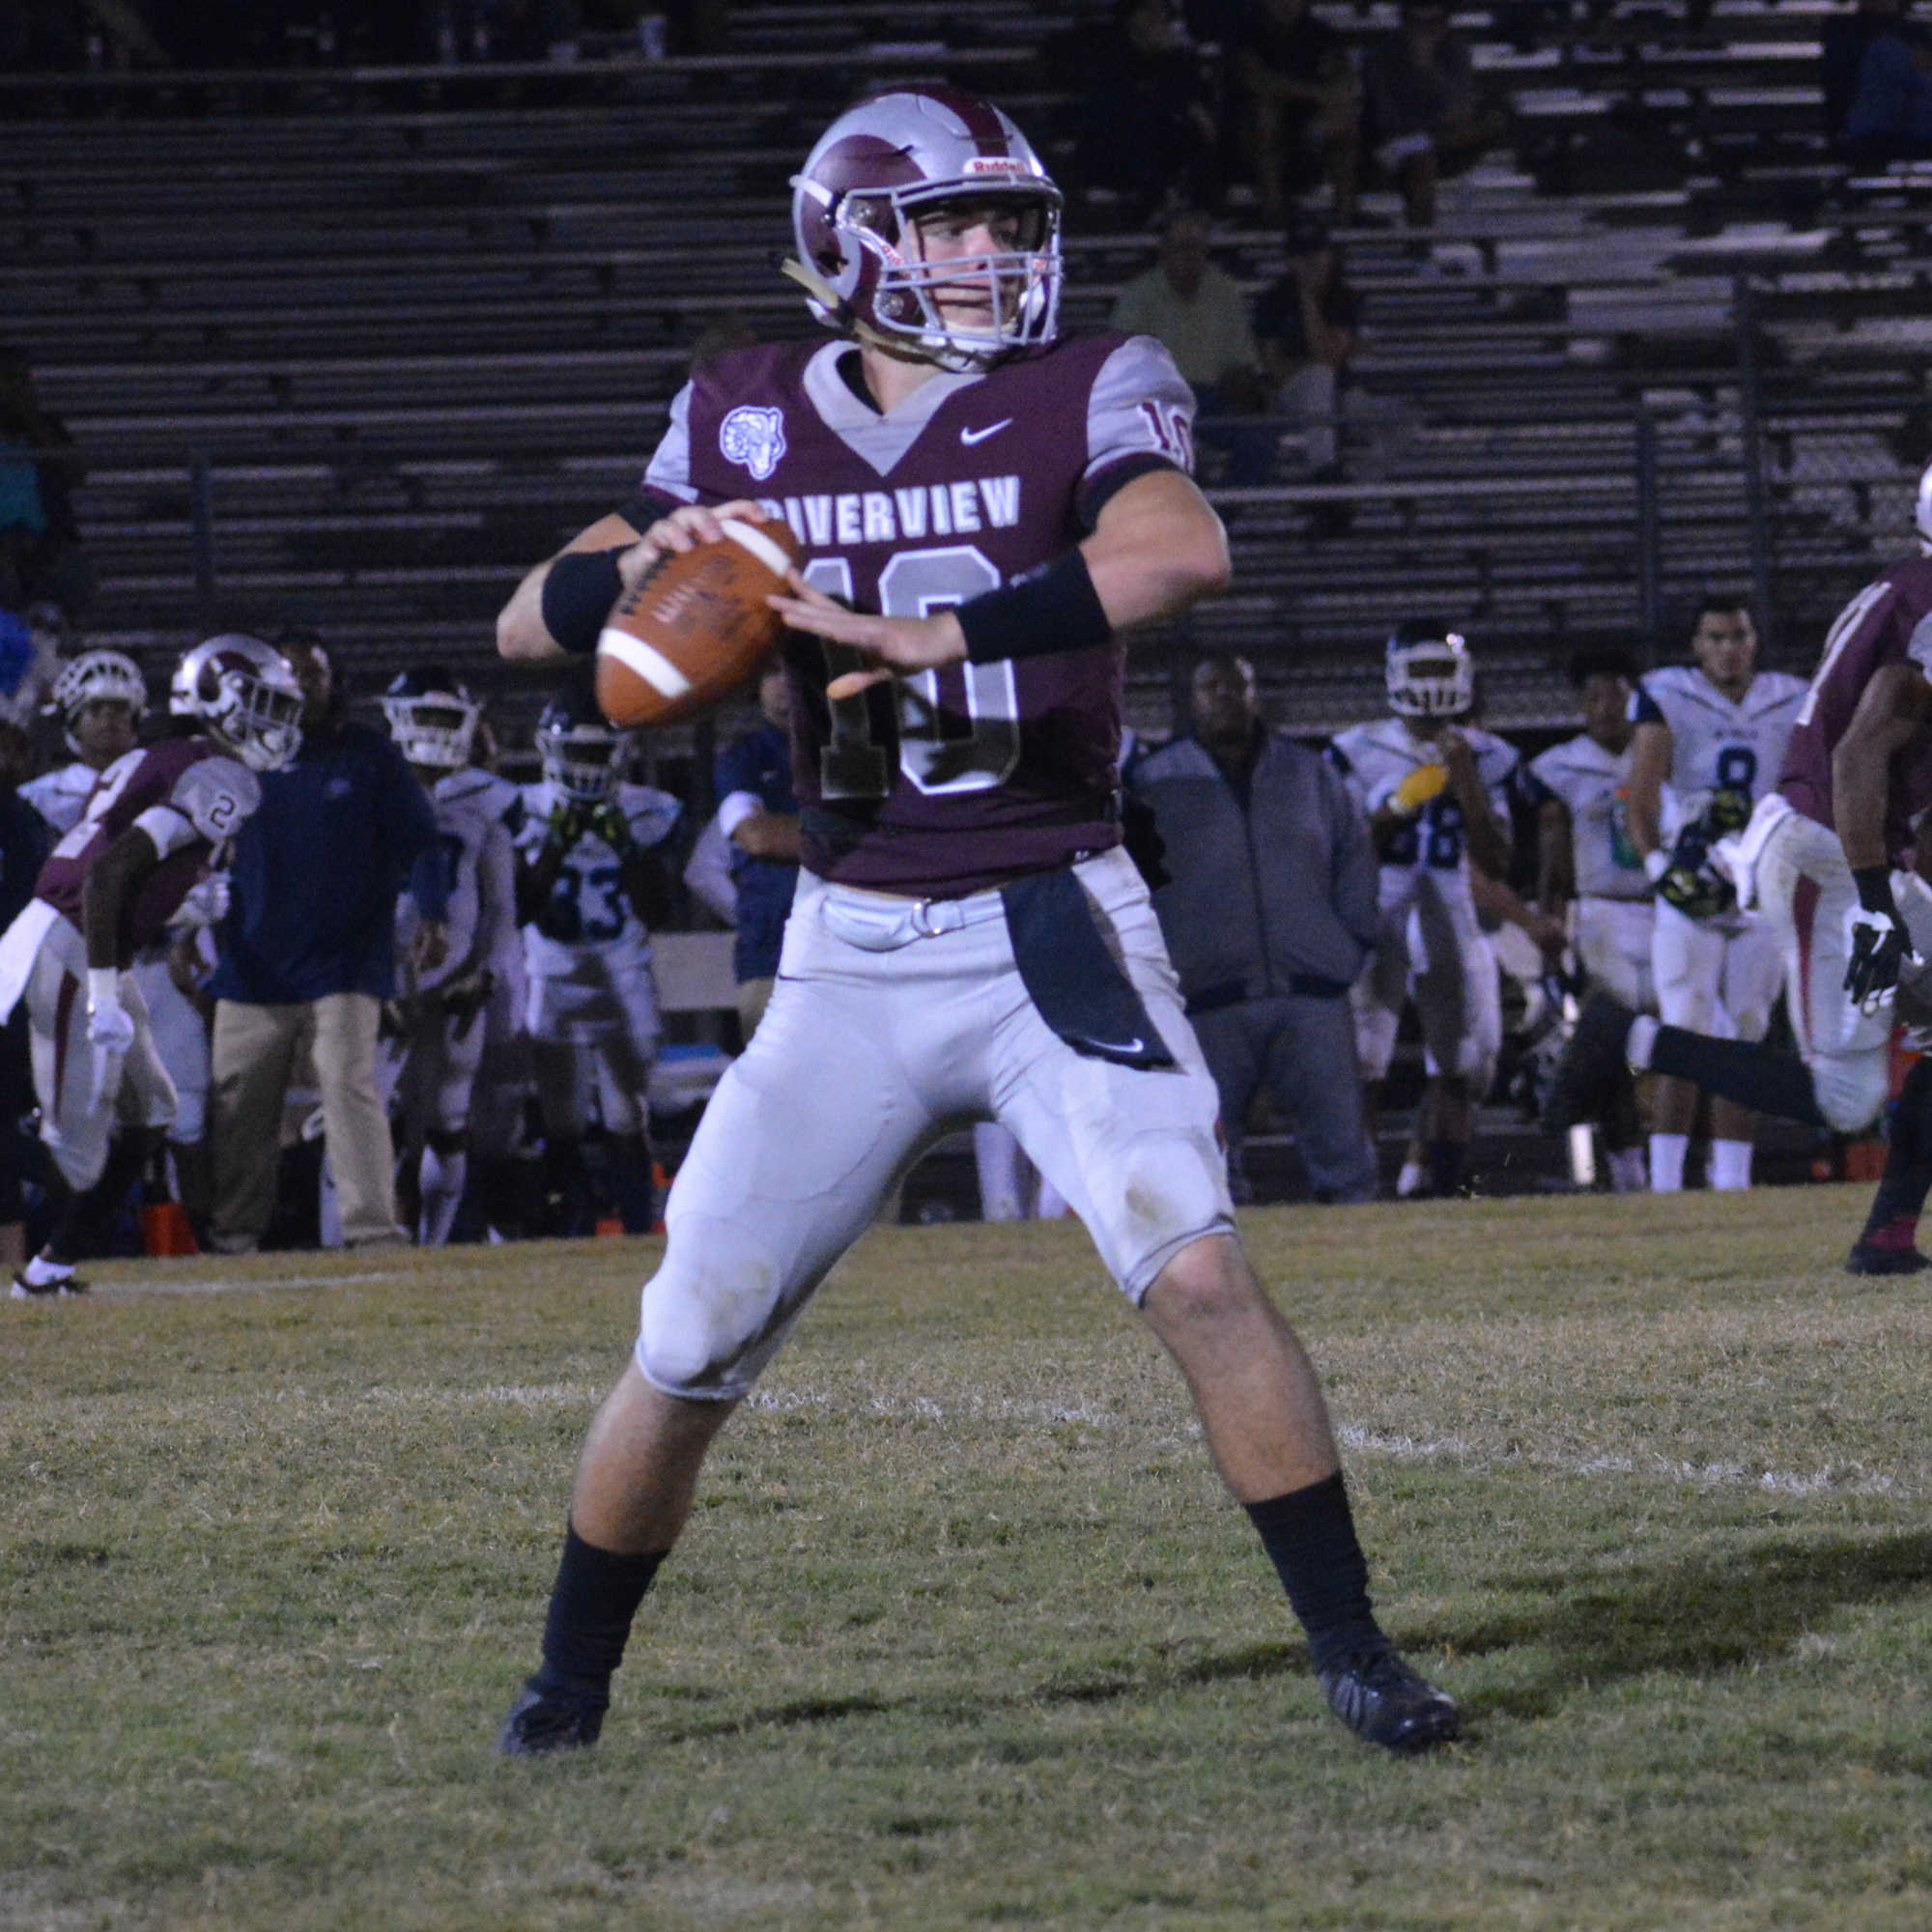 Riverview High quarterback Sean White looks for an open receiver downfield.